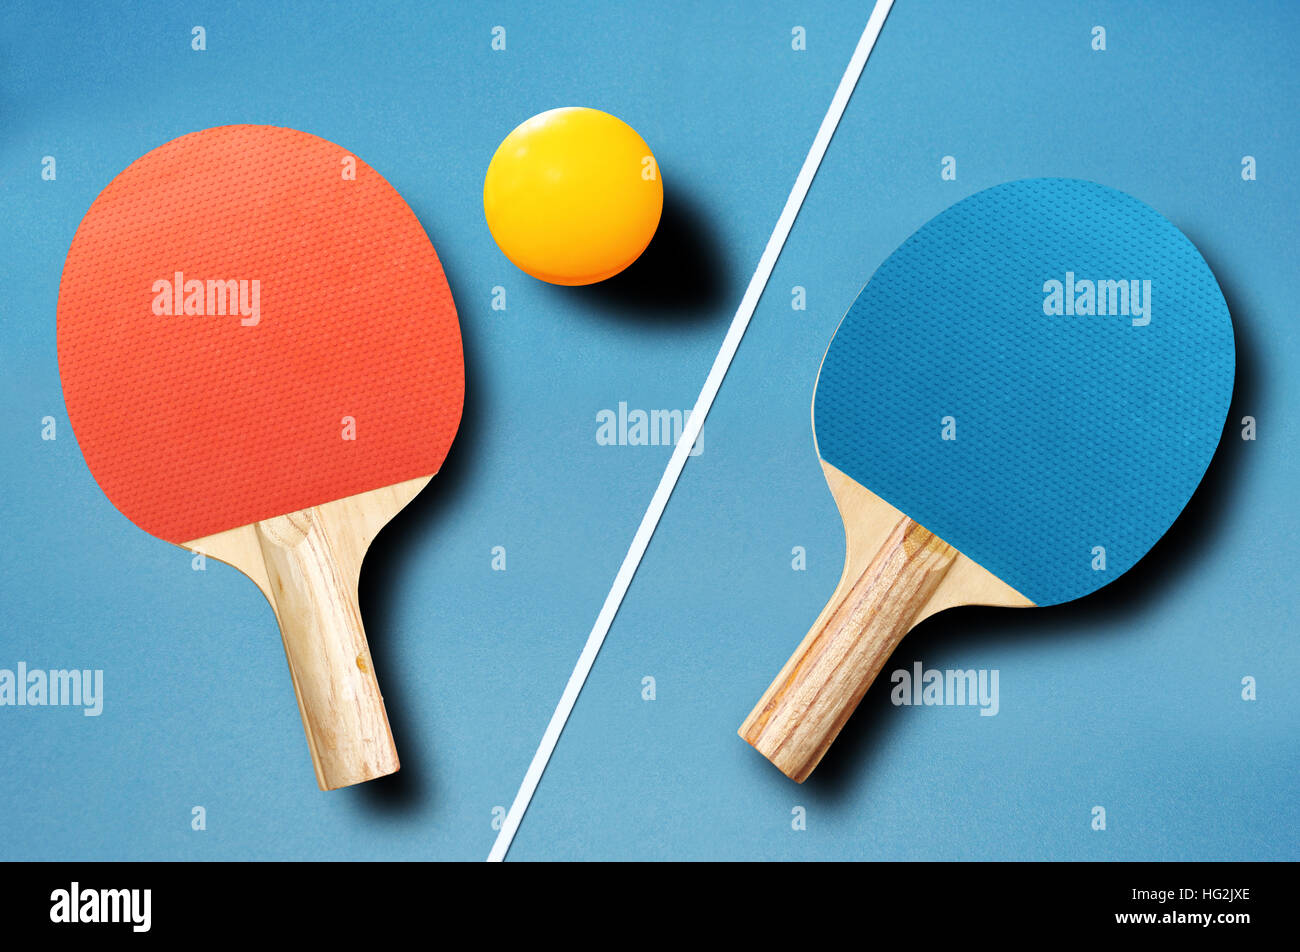 Pin pong ball with red and blue paddle on blue board Stock Photo